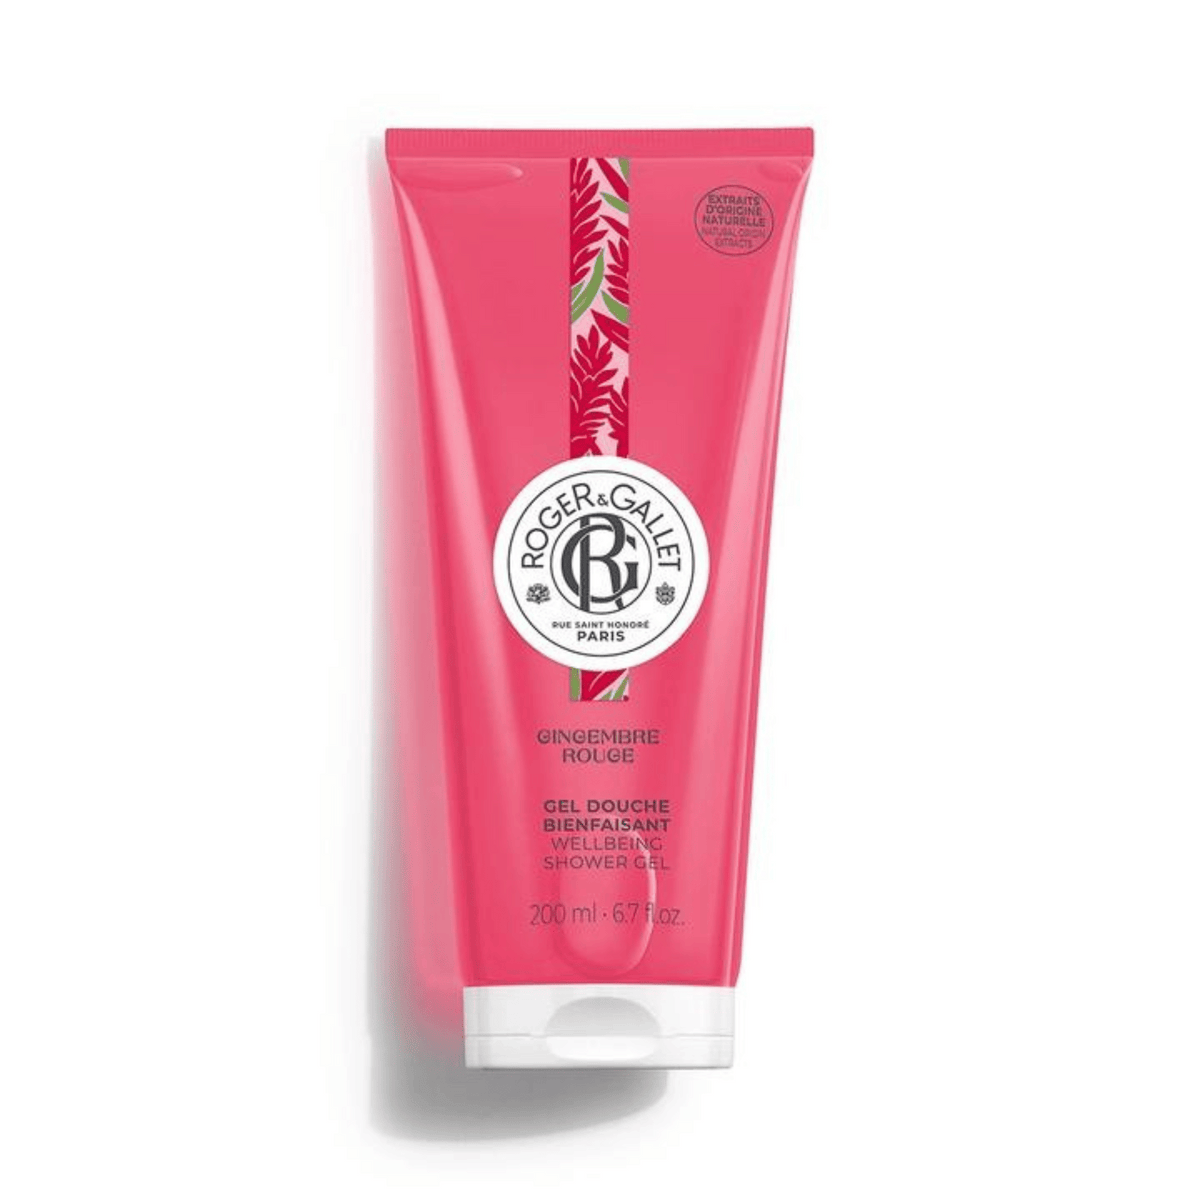 Primary Image of Gingembre Rouge (Red Ginger) Wellbeing Shower Gel